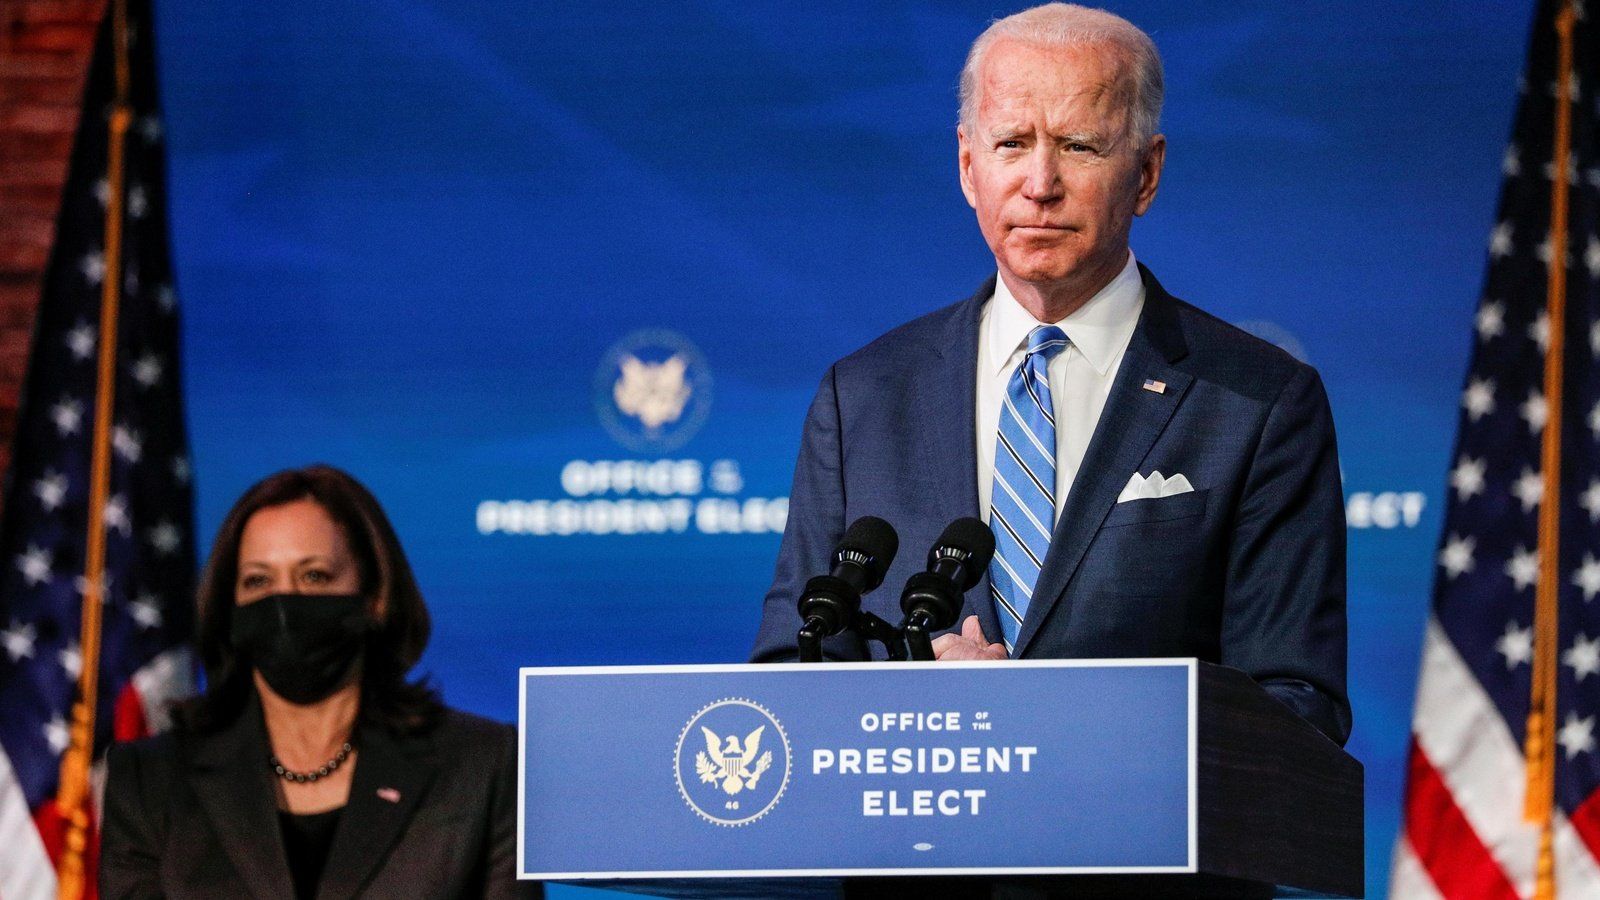 Transition 2021: What Can Biden Get Done?. Council on Foreign Relations